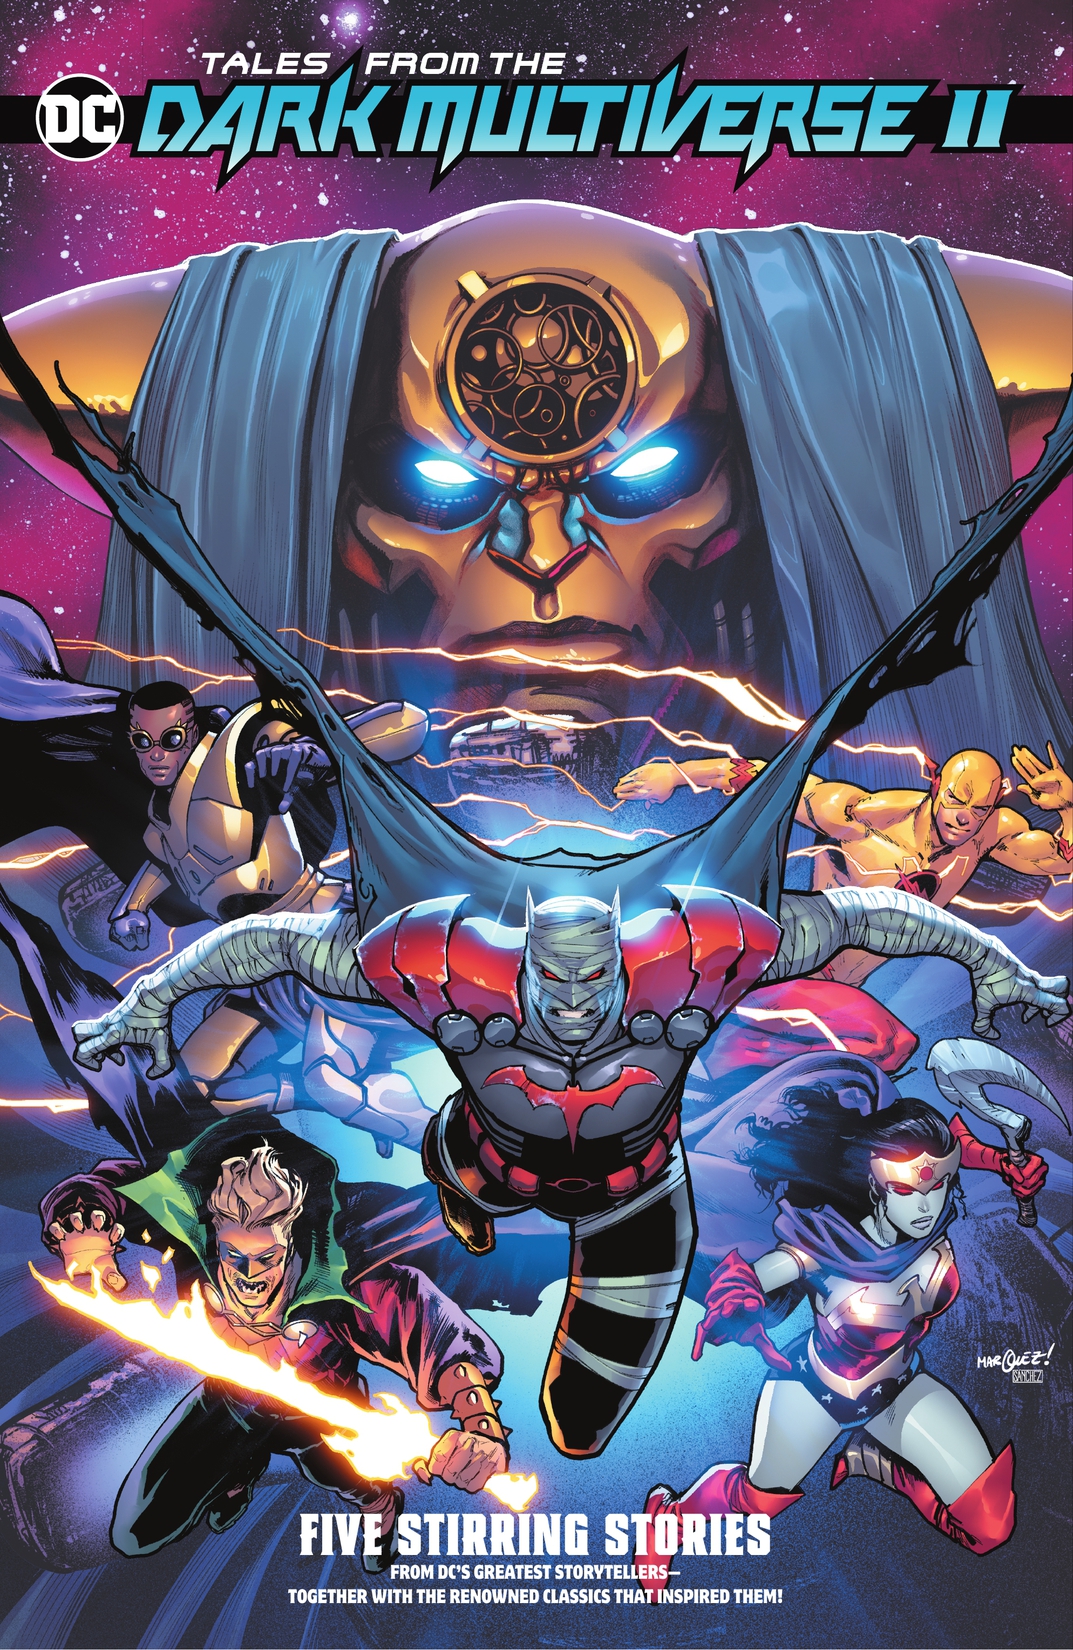 Tales from the DC Dark Multiverse II preview images